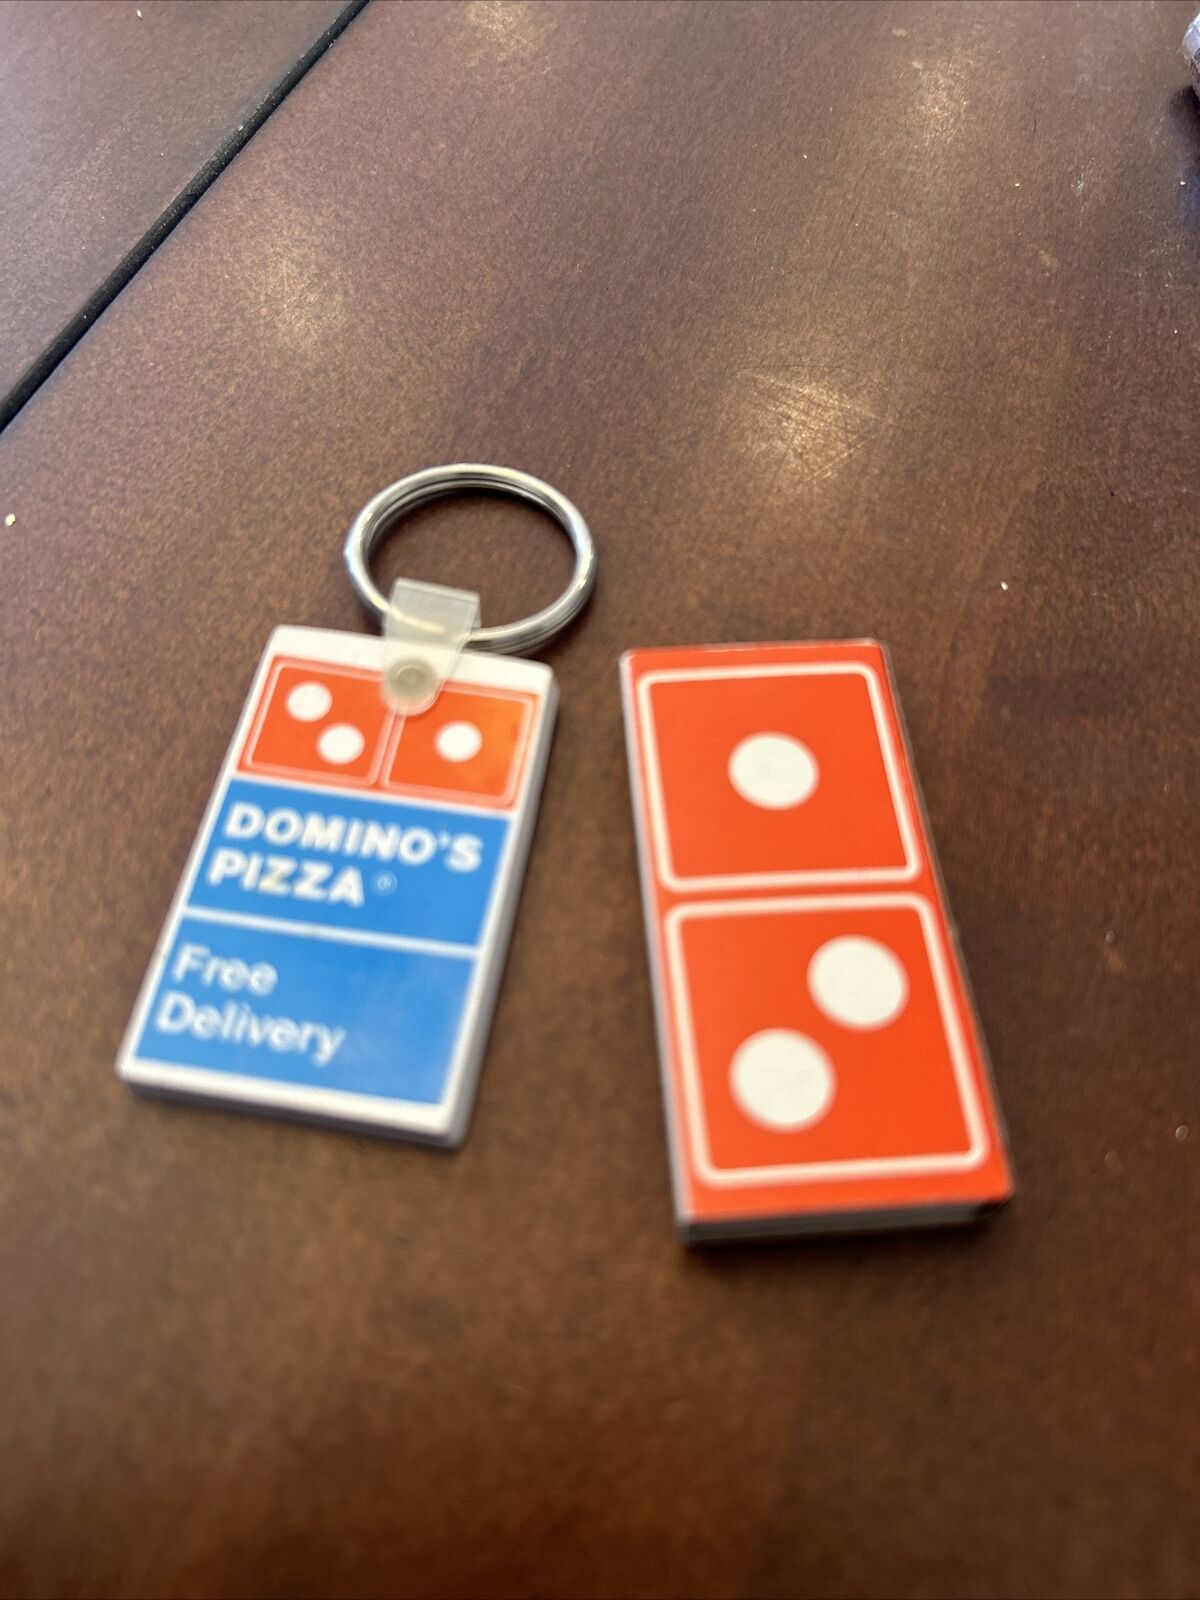 Vintage Domino’s Pizza Free Delivery Rubber Keychain And Matches